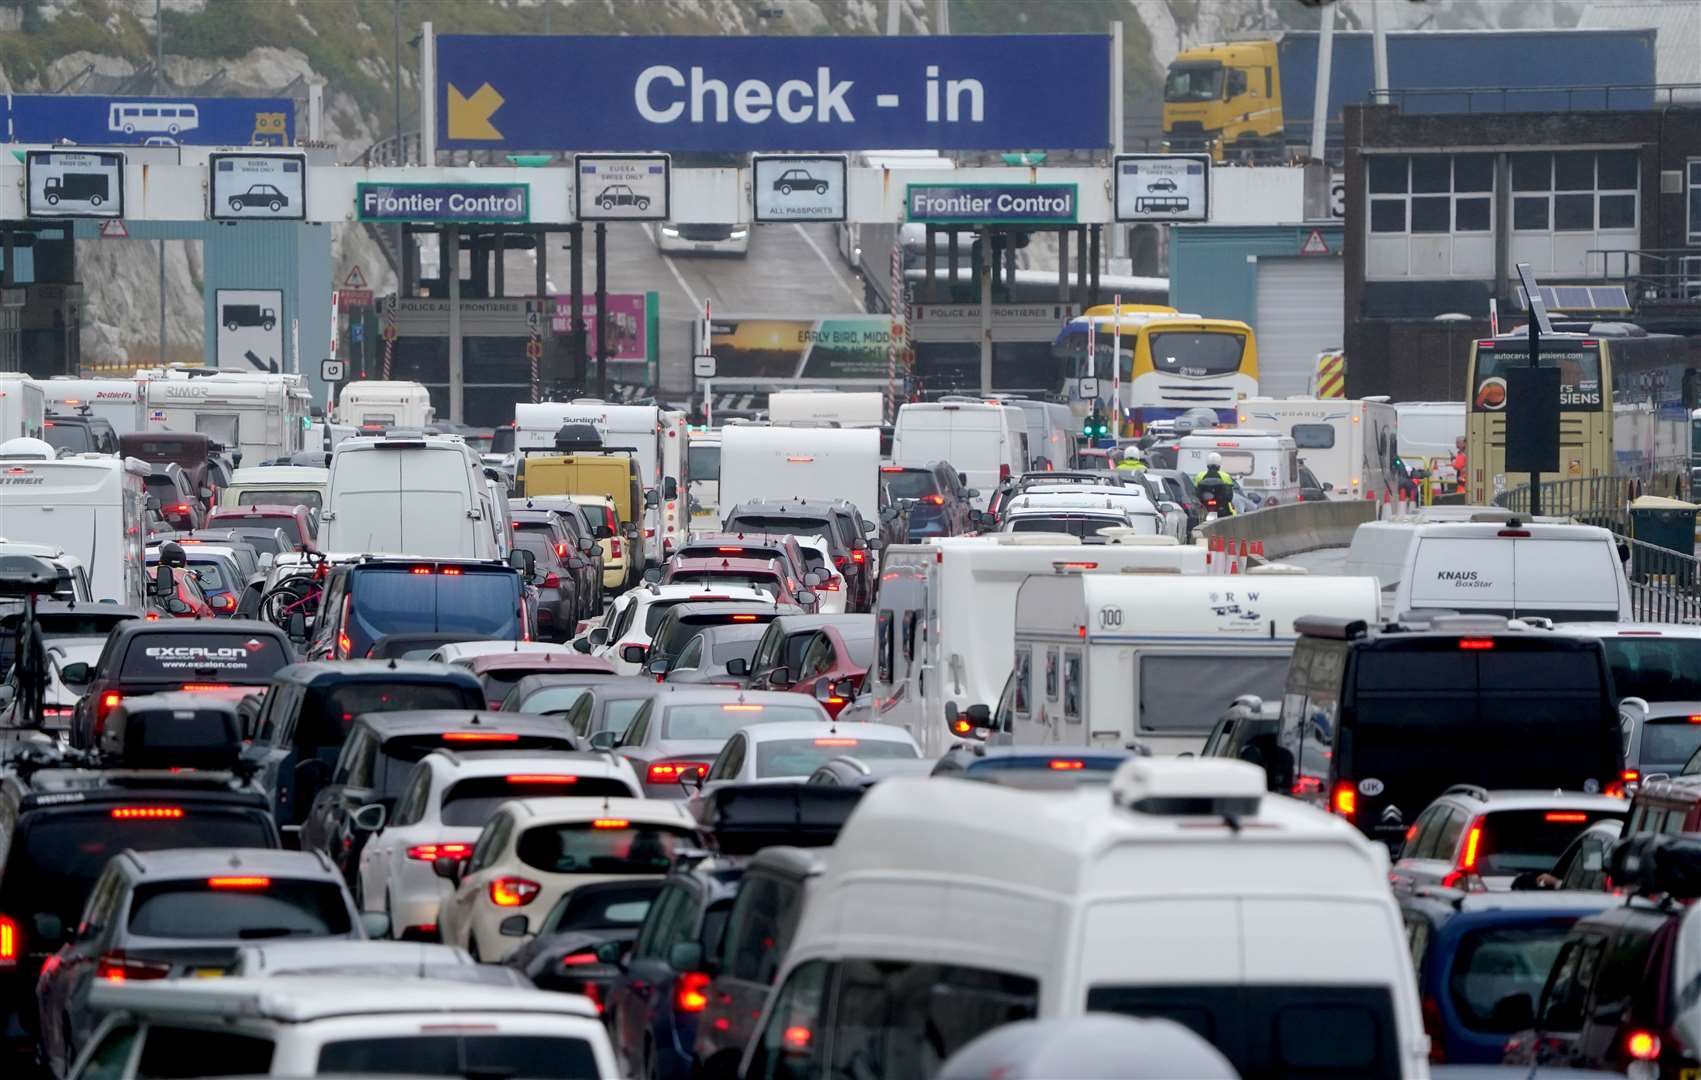 As of 9.25am on Wednesday, car numbers totalled 1,836.(Gareth Fuller/PA)